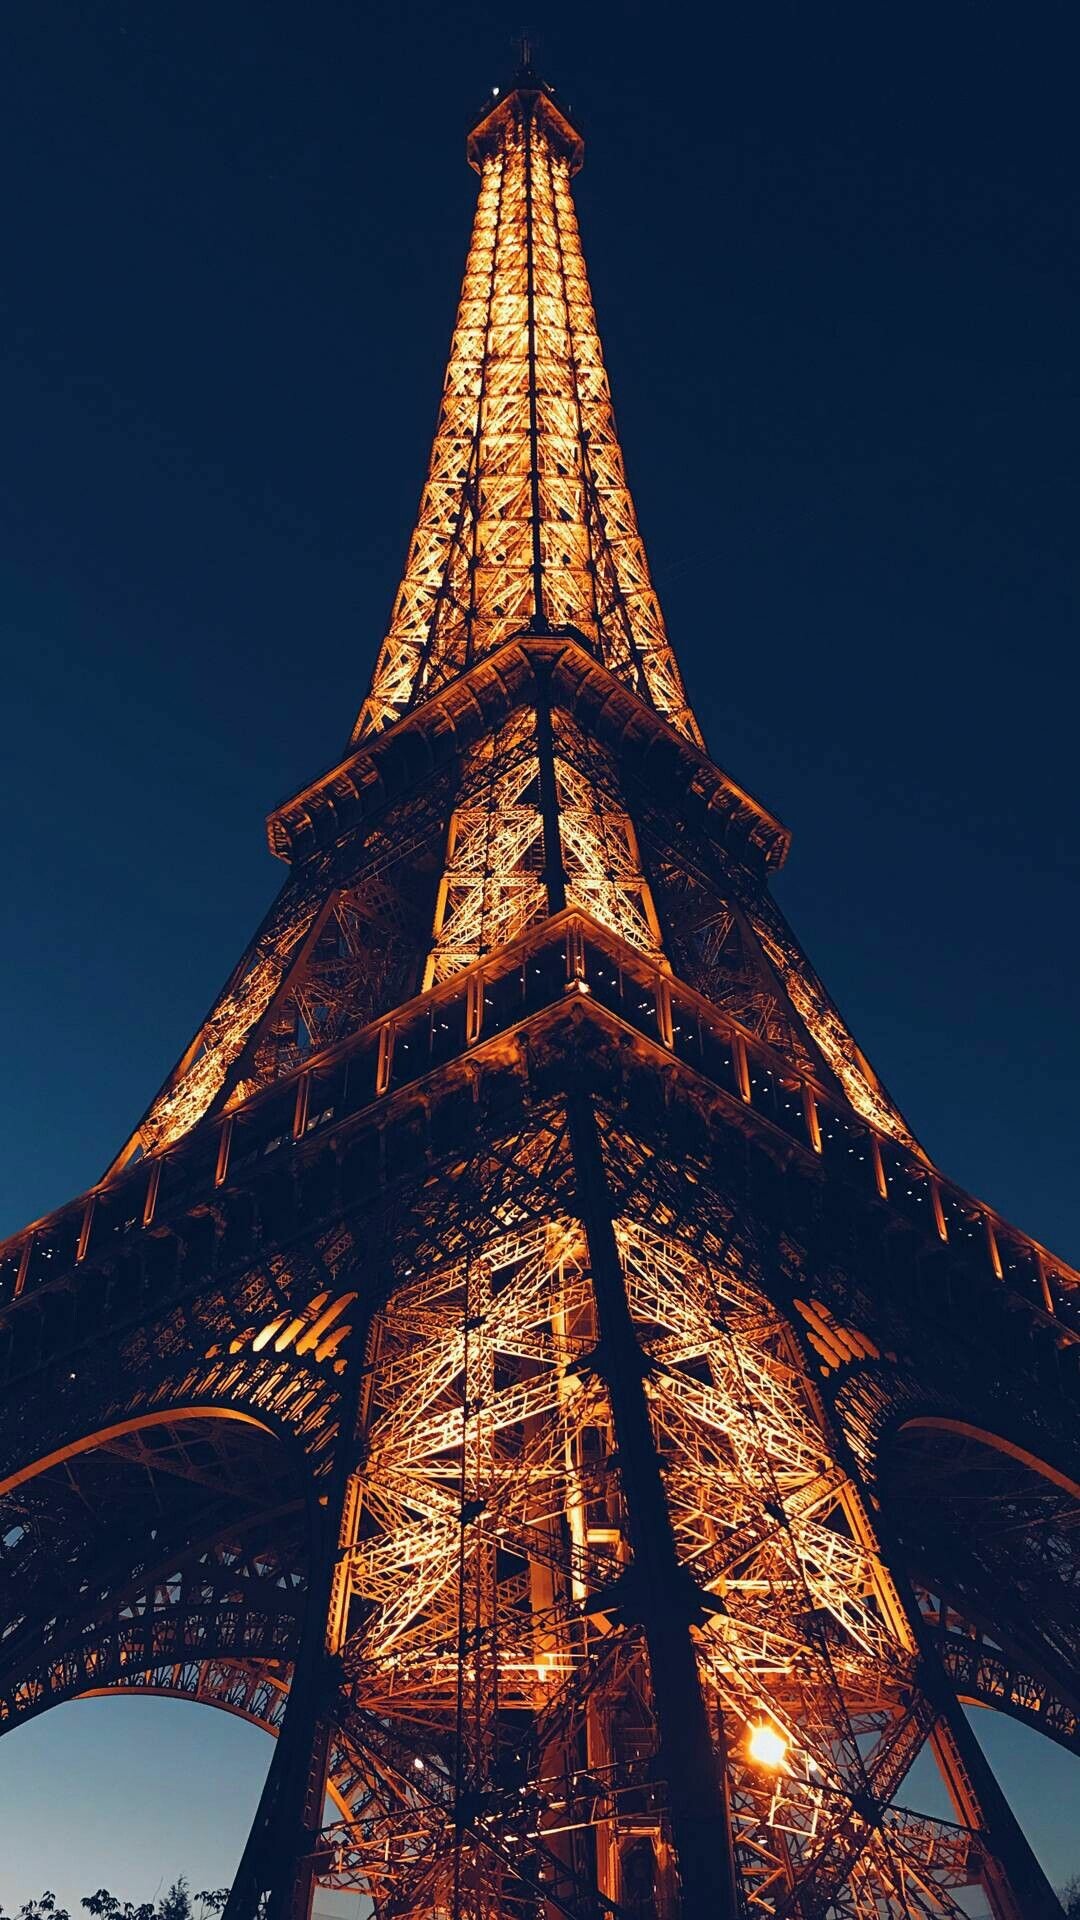 Eiffel Tower: One of the most recognizable structures in the entire world, Maurice Koechlin. 1080x1920 Full HD Wallpaper.